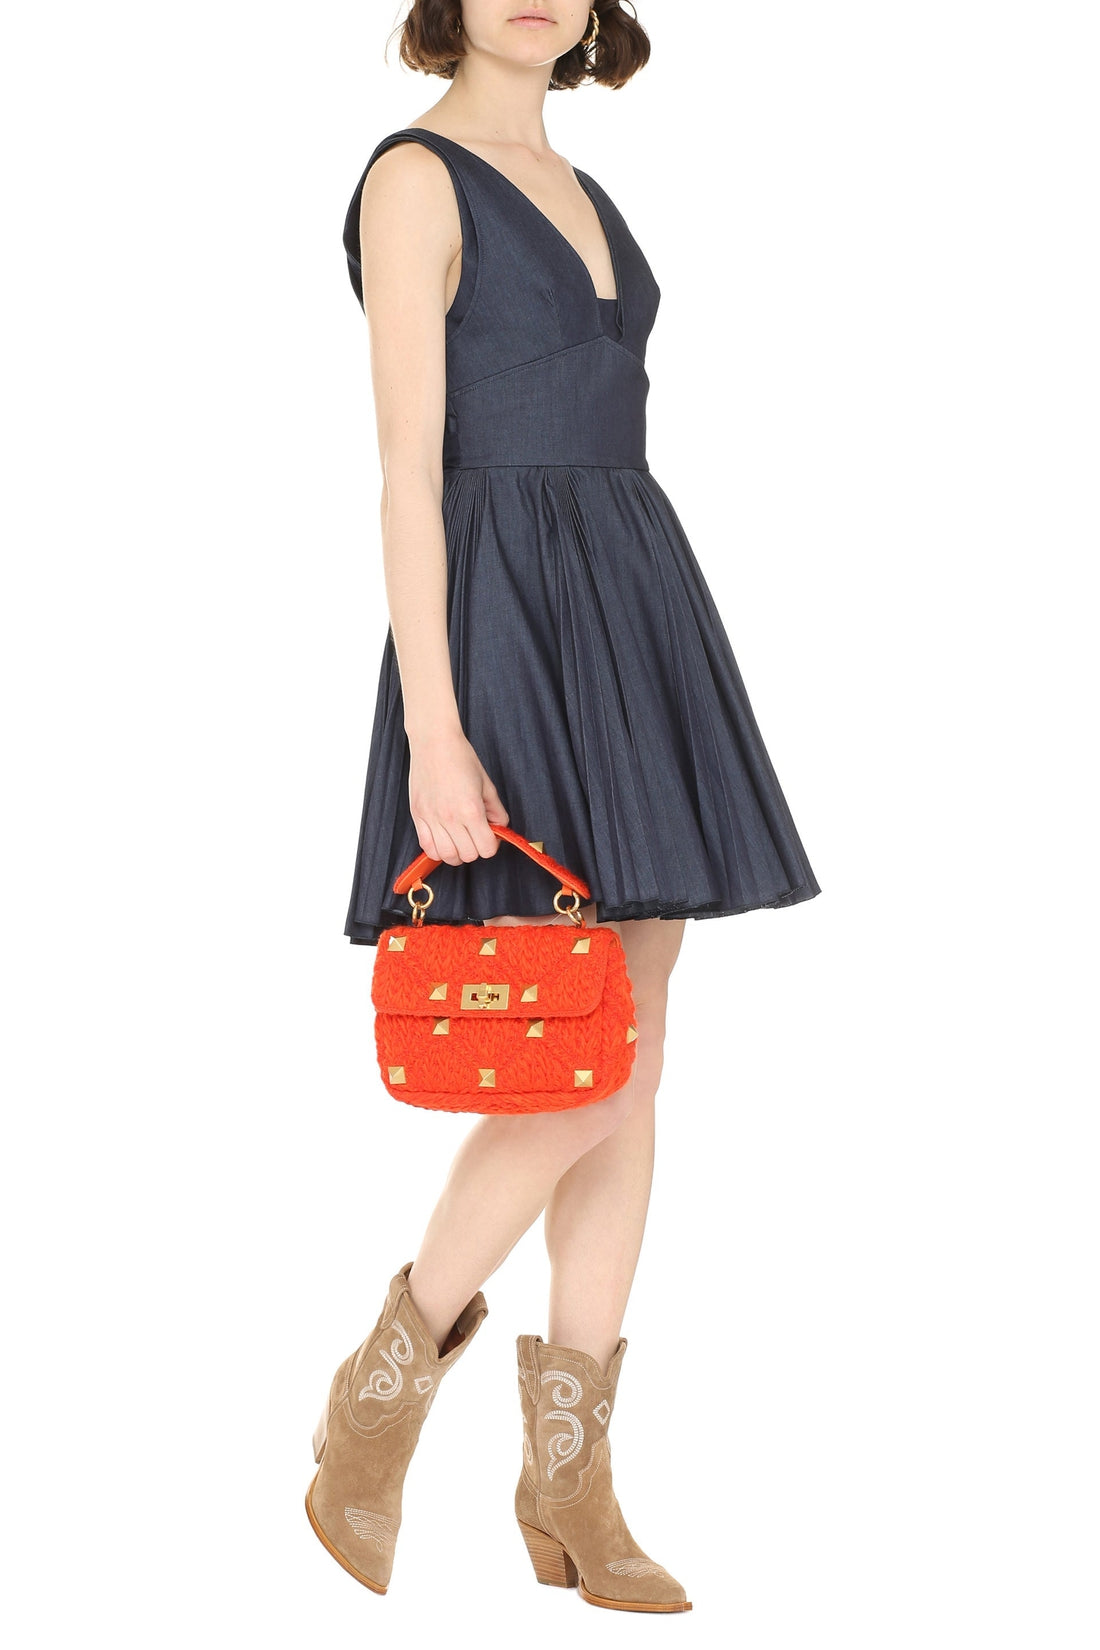 Giovanni Bedin-OUTLET-SALE-Pleated dress-ARCHIVIST